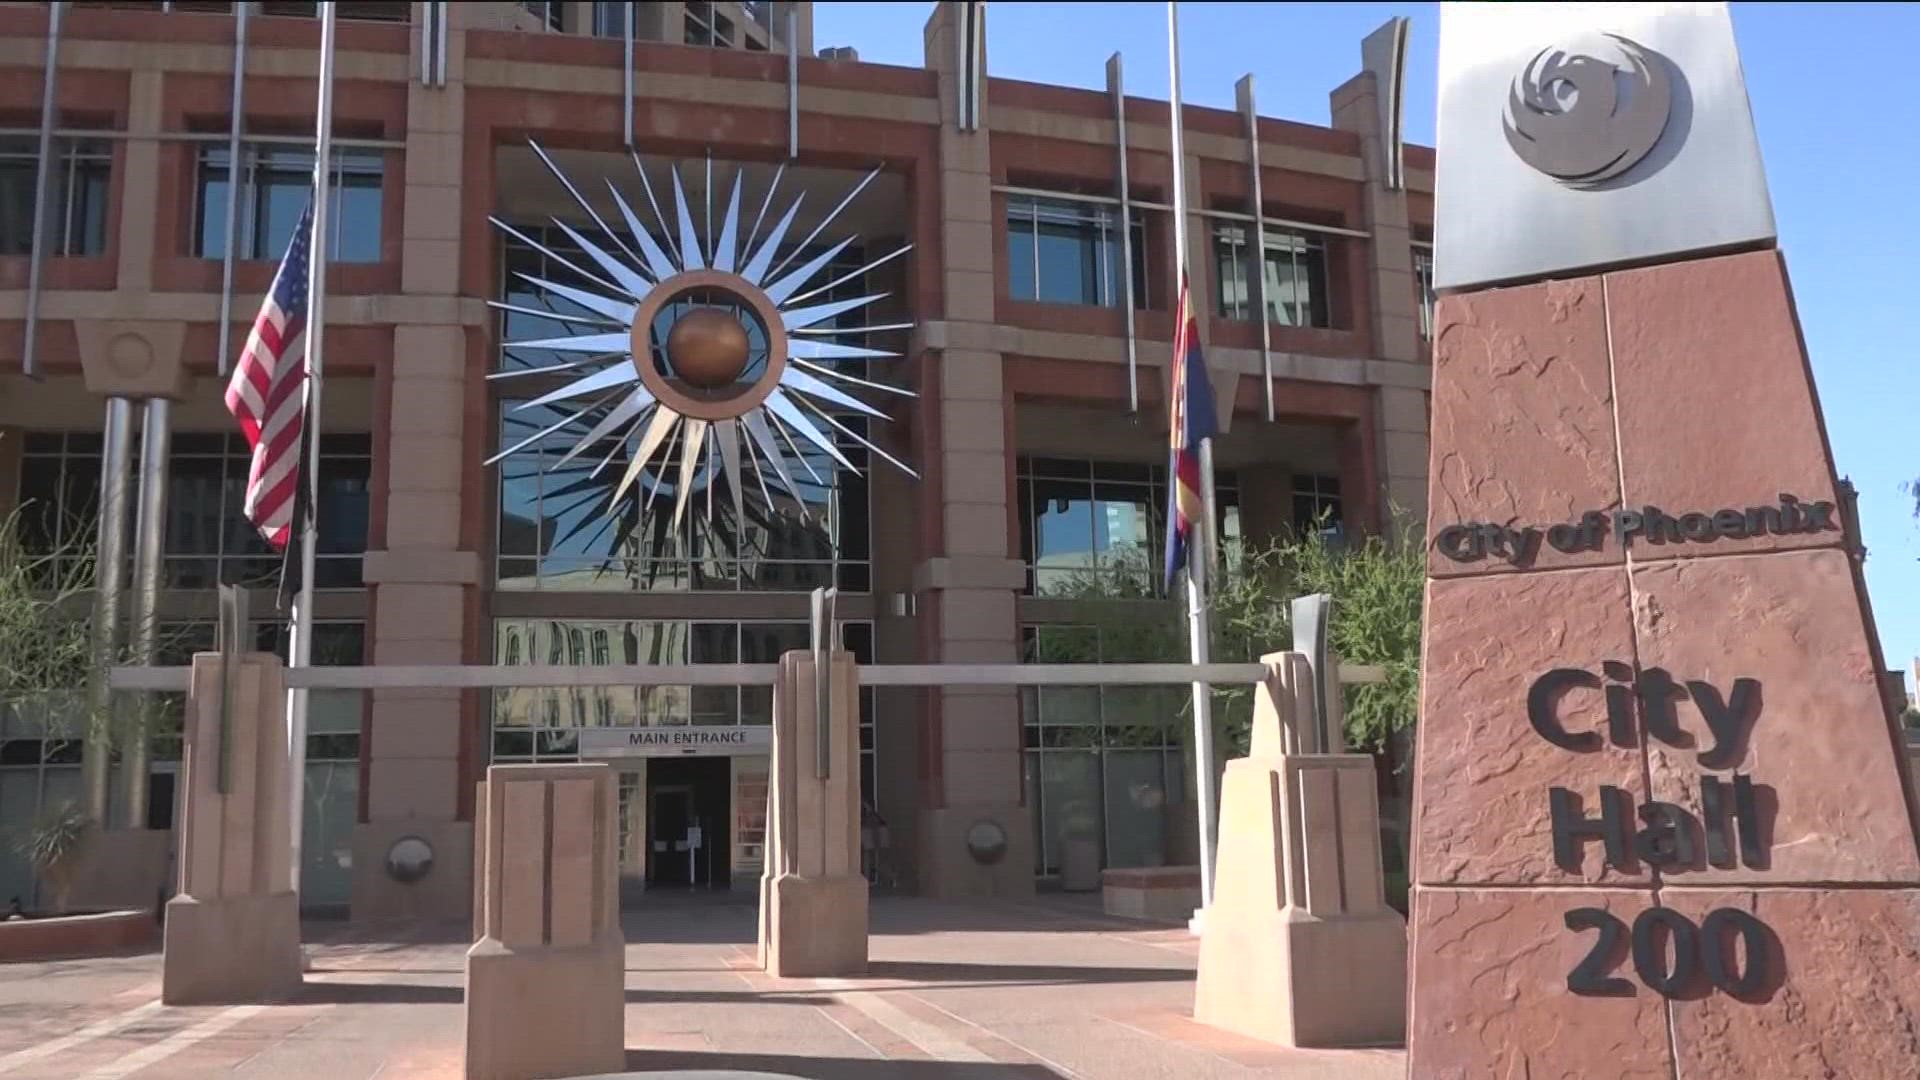 A thousand people a month are filling out applications needing help with their rent in the City of Phoenix. But the city has run out of rental assistance funds.